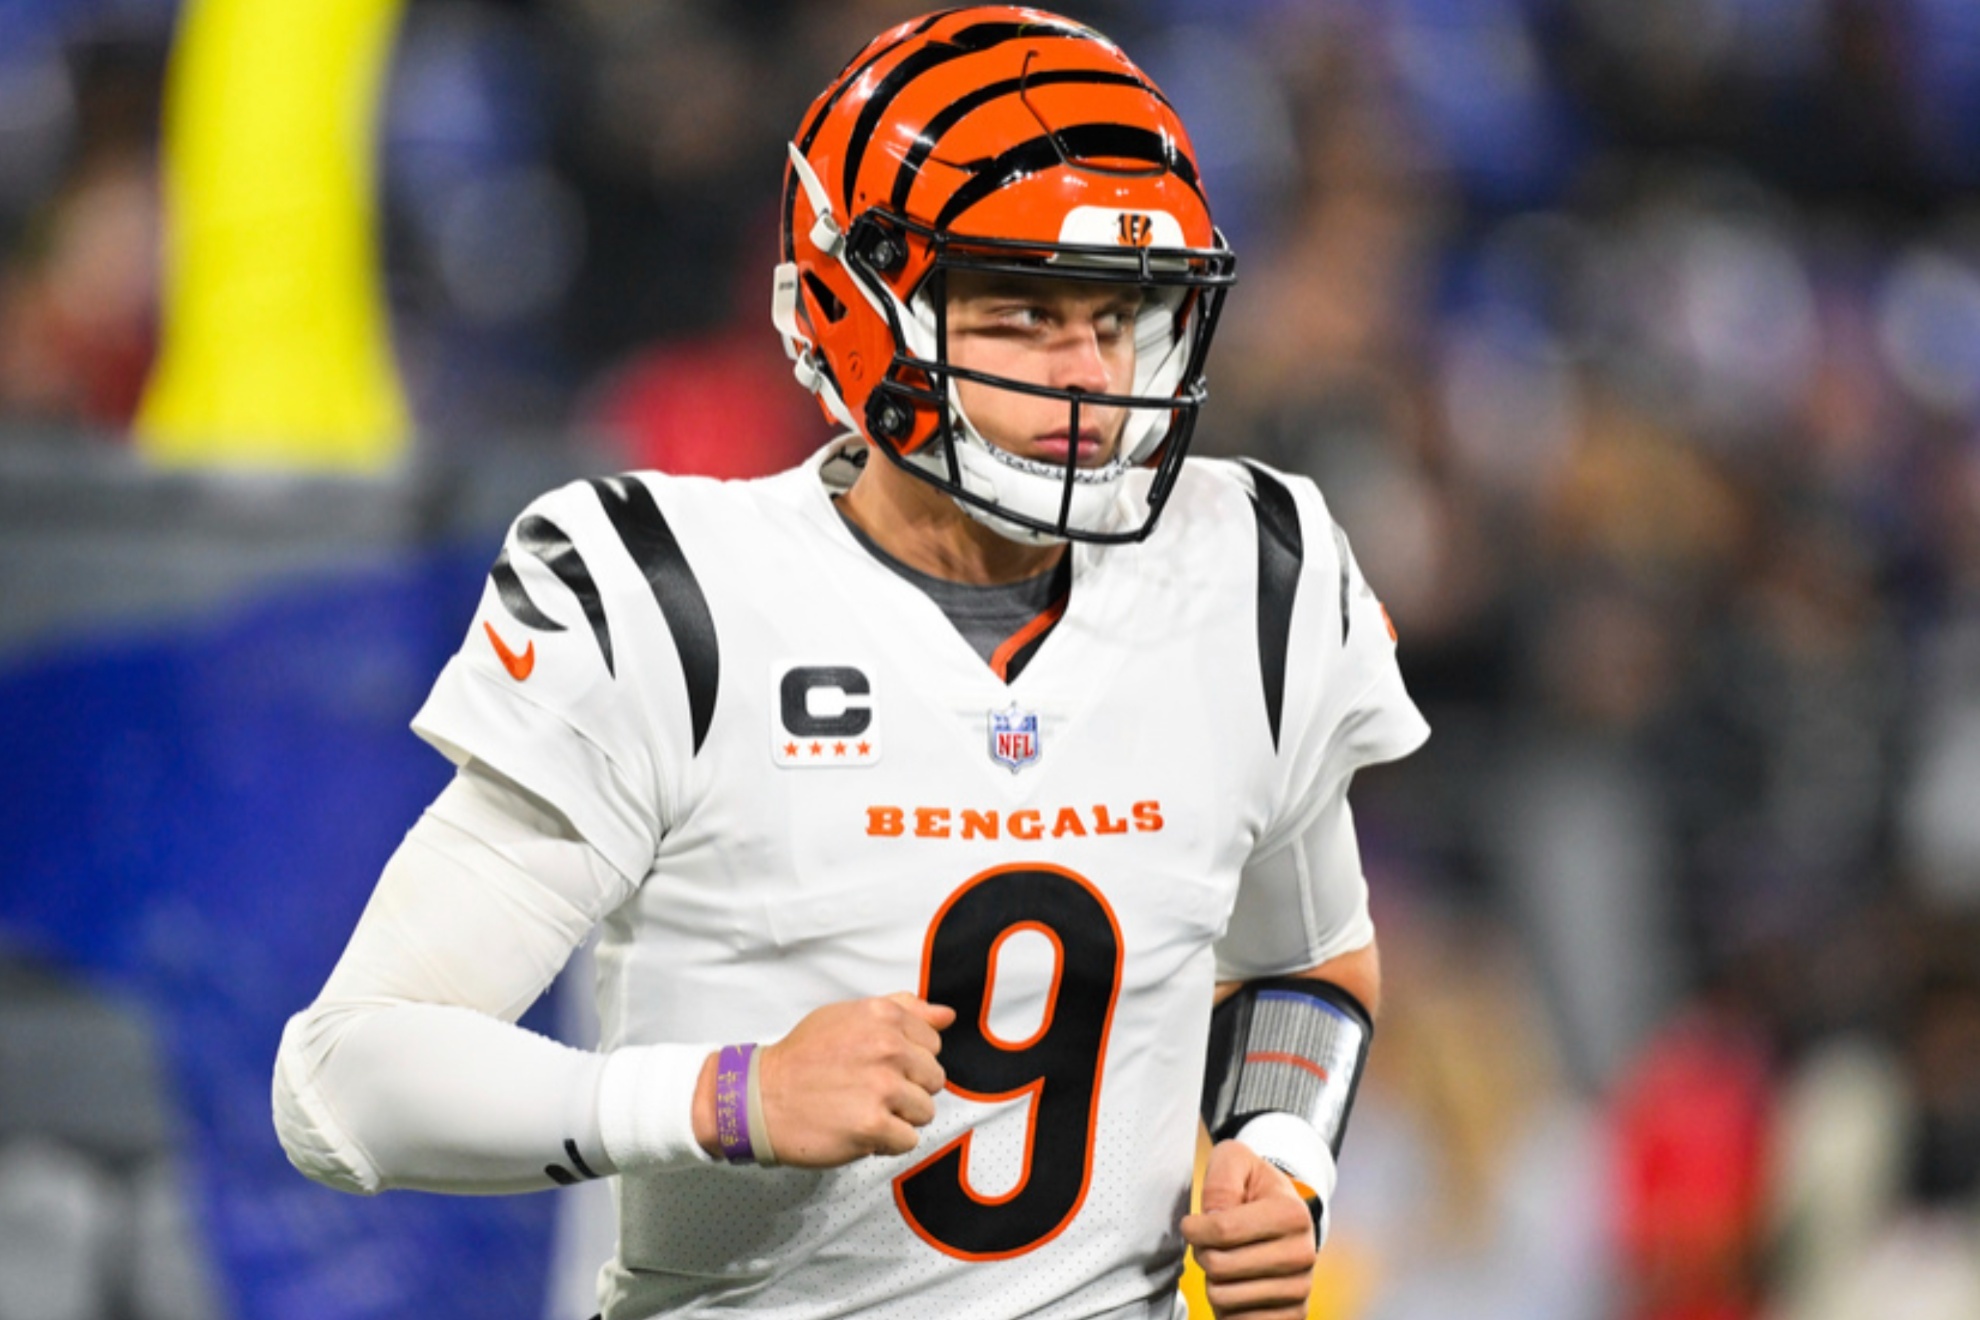 Bengals Joe Burrow is on schedule to come back from his hand injury